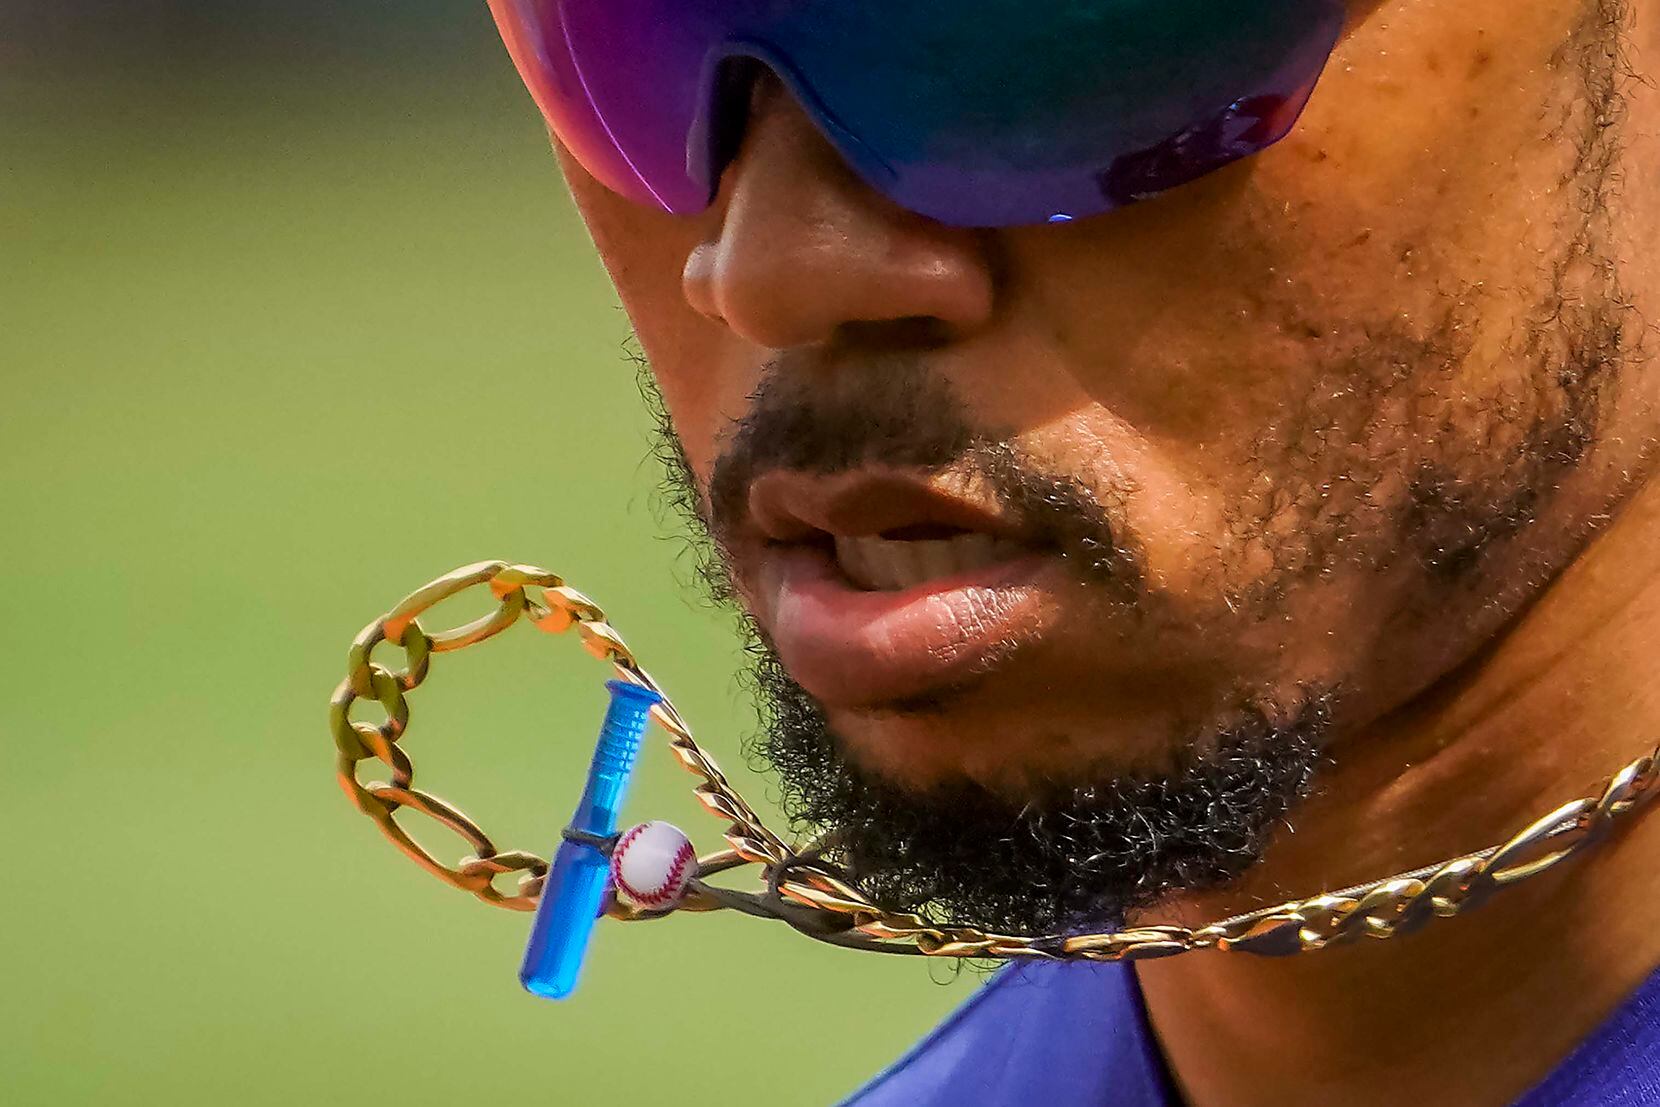 Los Angeles Dodgers right fielder Mookie Betts’ baseball talismans bounced around his neck as he ran off the field during a spring training game against the Texas Rangers in March in Surprise, Ariz. Betts said his father gave him the gold chain in high school, and a young fan presented him with the plastic bat and ball when he played for the Boston Red Sox.